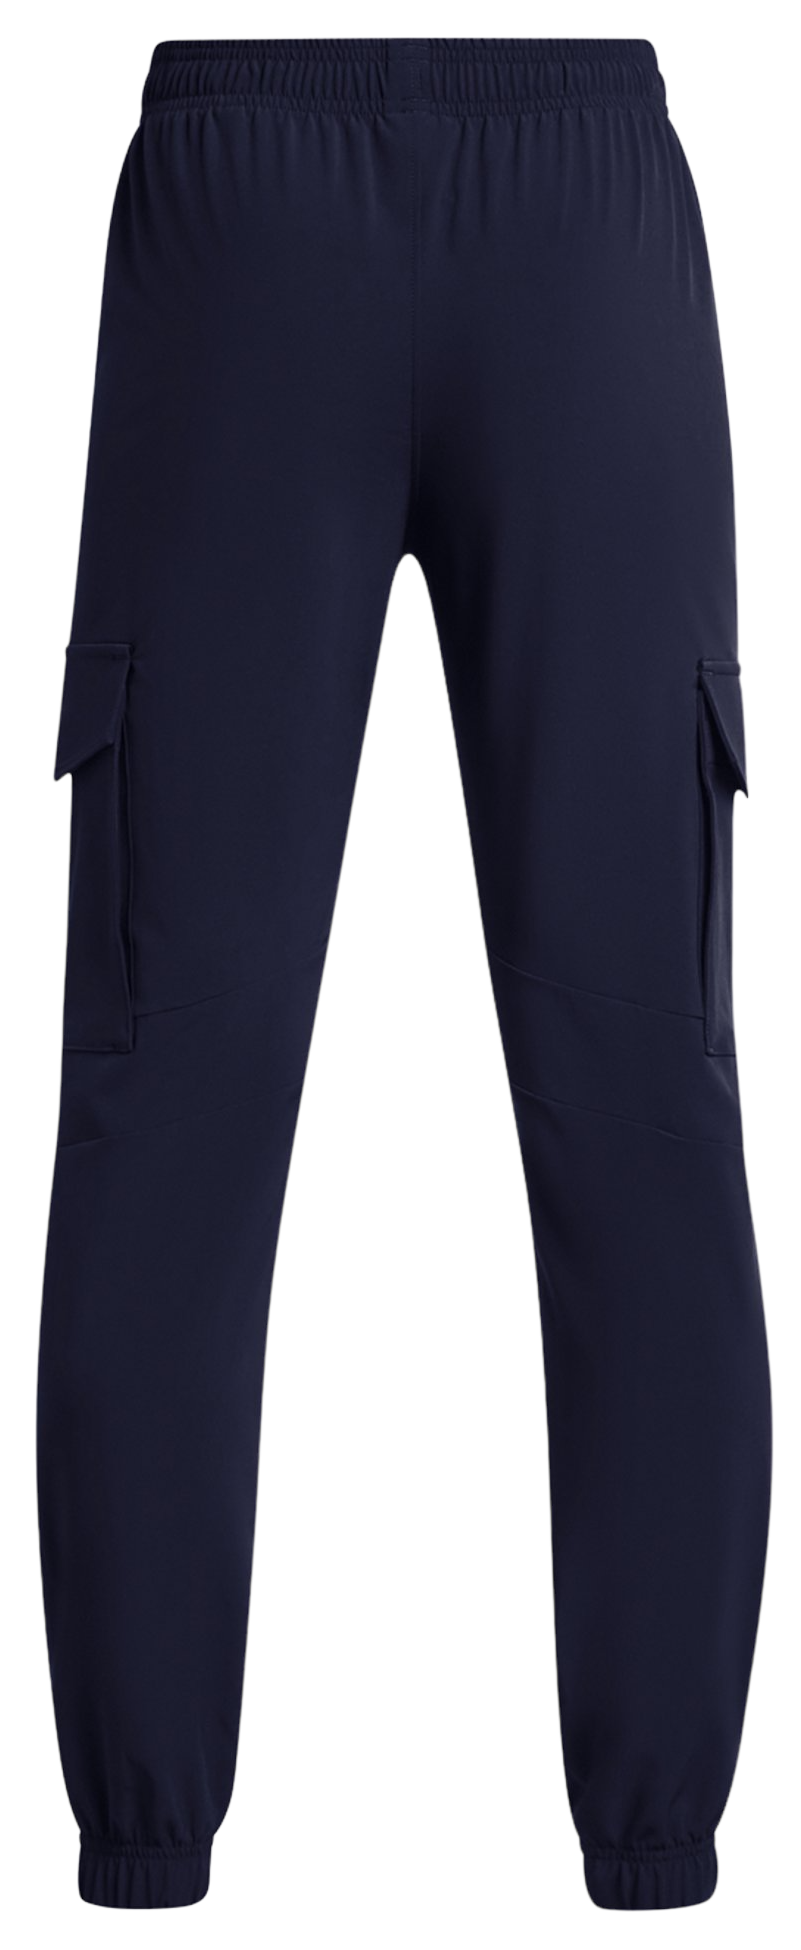 Under Armour Kids' Pennant Woven Cargo Pants